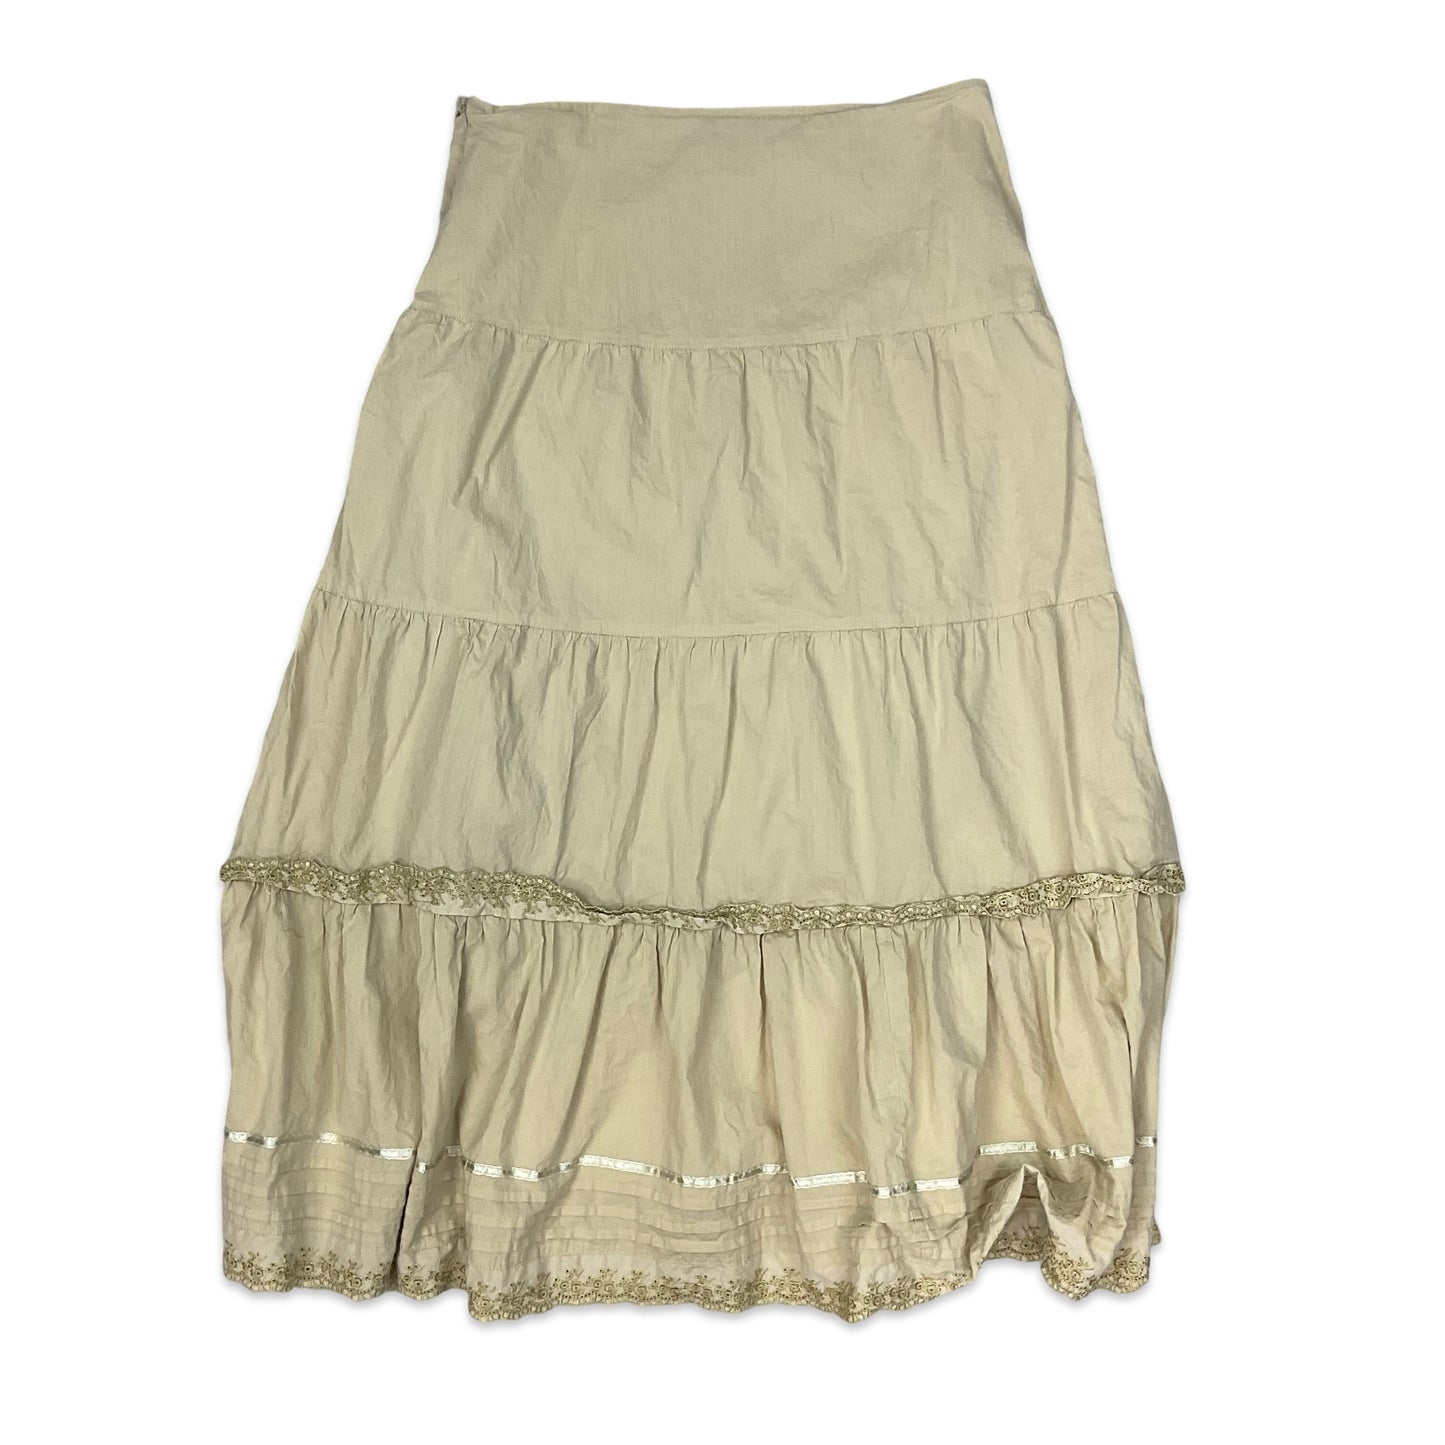 00's Yessica Tiered Beige Maxi Skirt 16